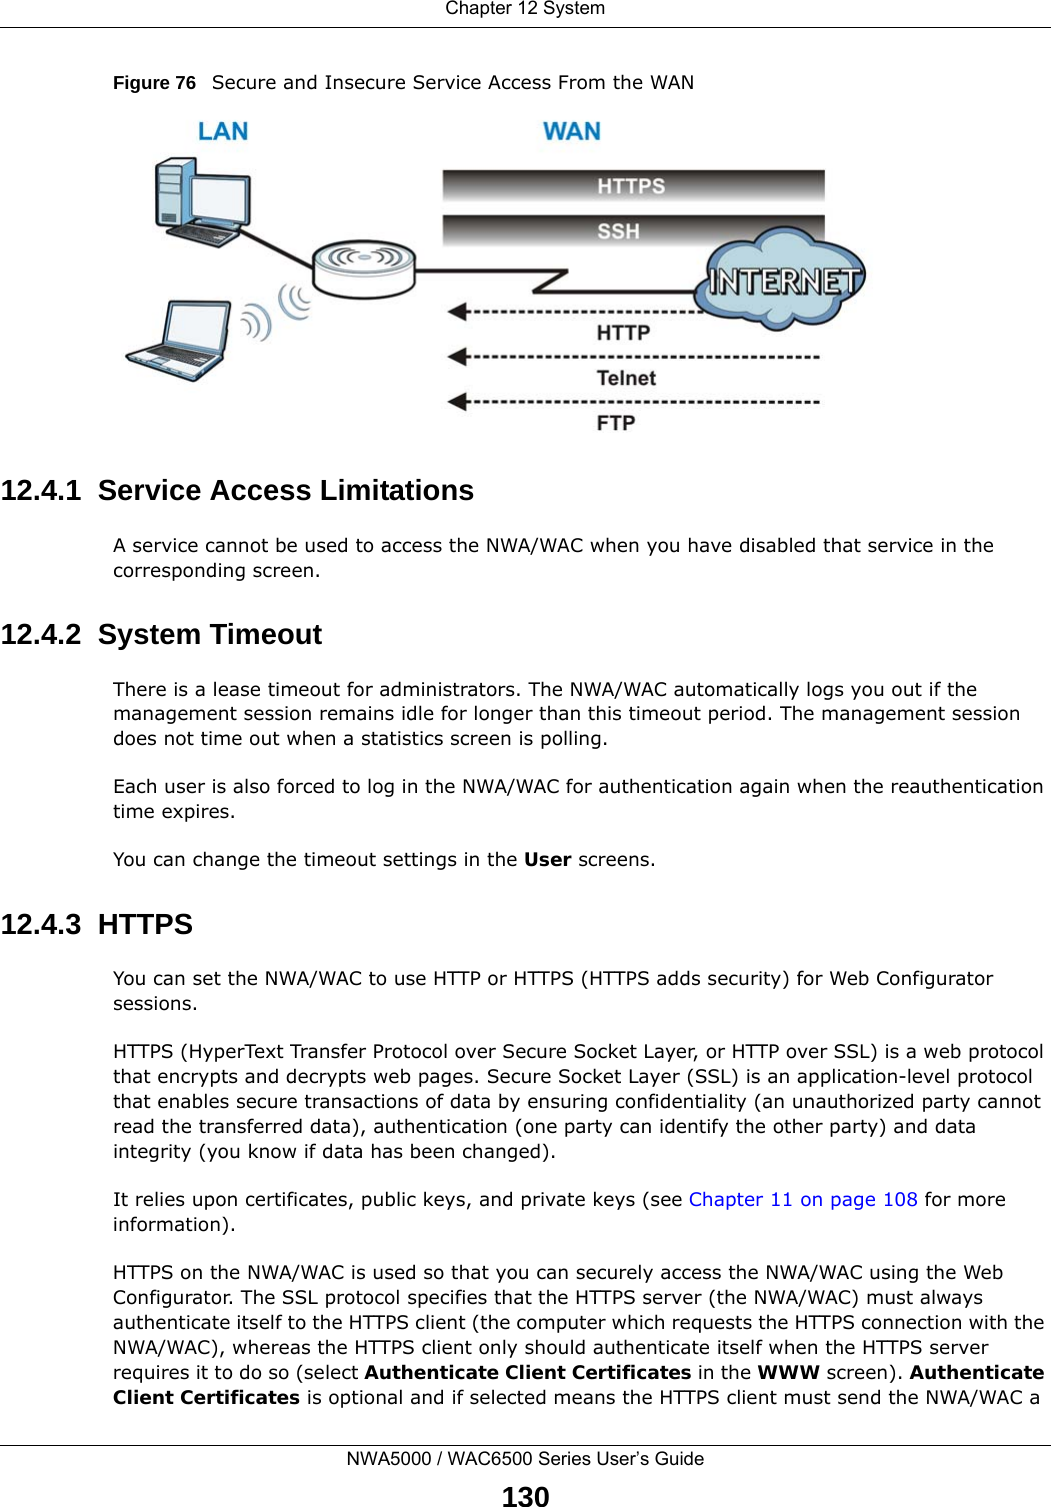 Chapter 12 SystemNWA5000 / WAC6500 Series User’s Guide130Figure 76   Secure and Insecure Service Access From the WAN12.4.1  Service Access LimitationsA service cannot be used to access the NWA/WAC when you have disabled that service in the corresponding screen.12.4.2  System TimeoutThere is a lease timeout for administrators. The NWA/WAC automatically logs you out if the management session remains idle for longer than this timeout period. The management session does not time out when a statistics screen is polling. Each user is also forced to log in the NWA/WAC for authentication again when the reauthentication time expires. You can change the timeout settings in the User screens.12.4.3  HTTPSYou can set the NWA/WAC to use HTTP or HTTPS (HTTPS adds security) for Web Configurator sessions. HTTPS (HyperText Transfer Protocol over Secure Socket Layer, or HTTP over SSL) is a web protocol that encrypts and decrypts web pages. Secure Socket Layer (SSL) is an application-level protocol that enables secure transactions of data by ensuring confidentiality (an unauthorized party cannot read the transferred data), authentication (one party can identify the other party) and data integrity (you know if data has been changed). It relies upon certificates, public keys, and private keys (see Chapter 11 on page 108 for more information).HTTPS on the NWA/WAC is used so that you can securely access the NWA/WAC using the Web Configurator. The SSL protocol specifies that the HTTPS server (the NWA/WAC) must always authenticate itself to the HTTPS client (the computer which requests the HTTPS connection with the NWA/WAC), whereas the HTTPS client only should authenticate itself when the HTTPS server requires it to do so (select Authenticate Client Certificates in the WWW screen). Authenticate Client Certificates is optional and if selected means the HTTPS client must send the NWA/WAC a 